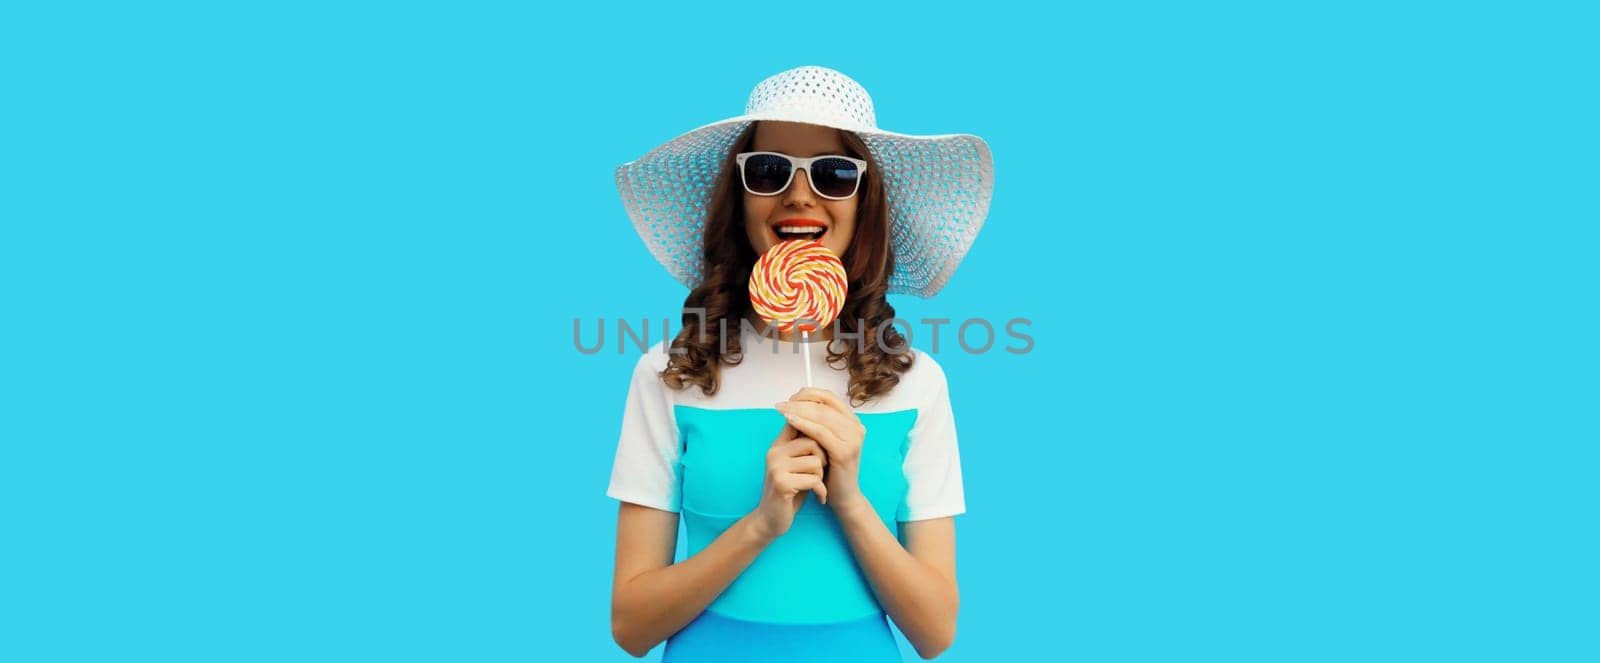 Portrait of happy cheerful smiling young woman holding colorful lollipop wearing white summer hat, sunglasses on blue background